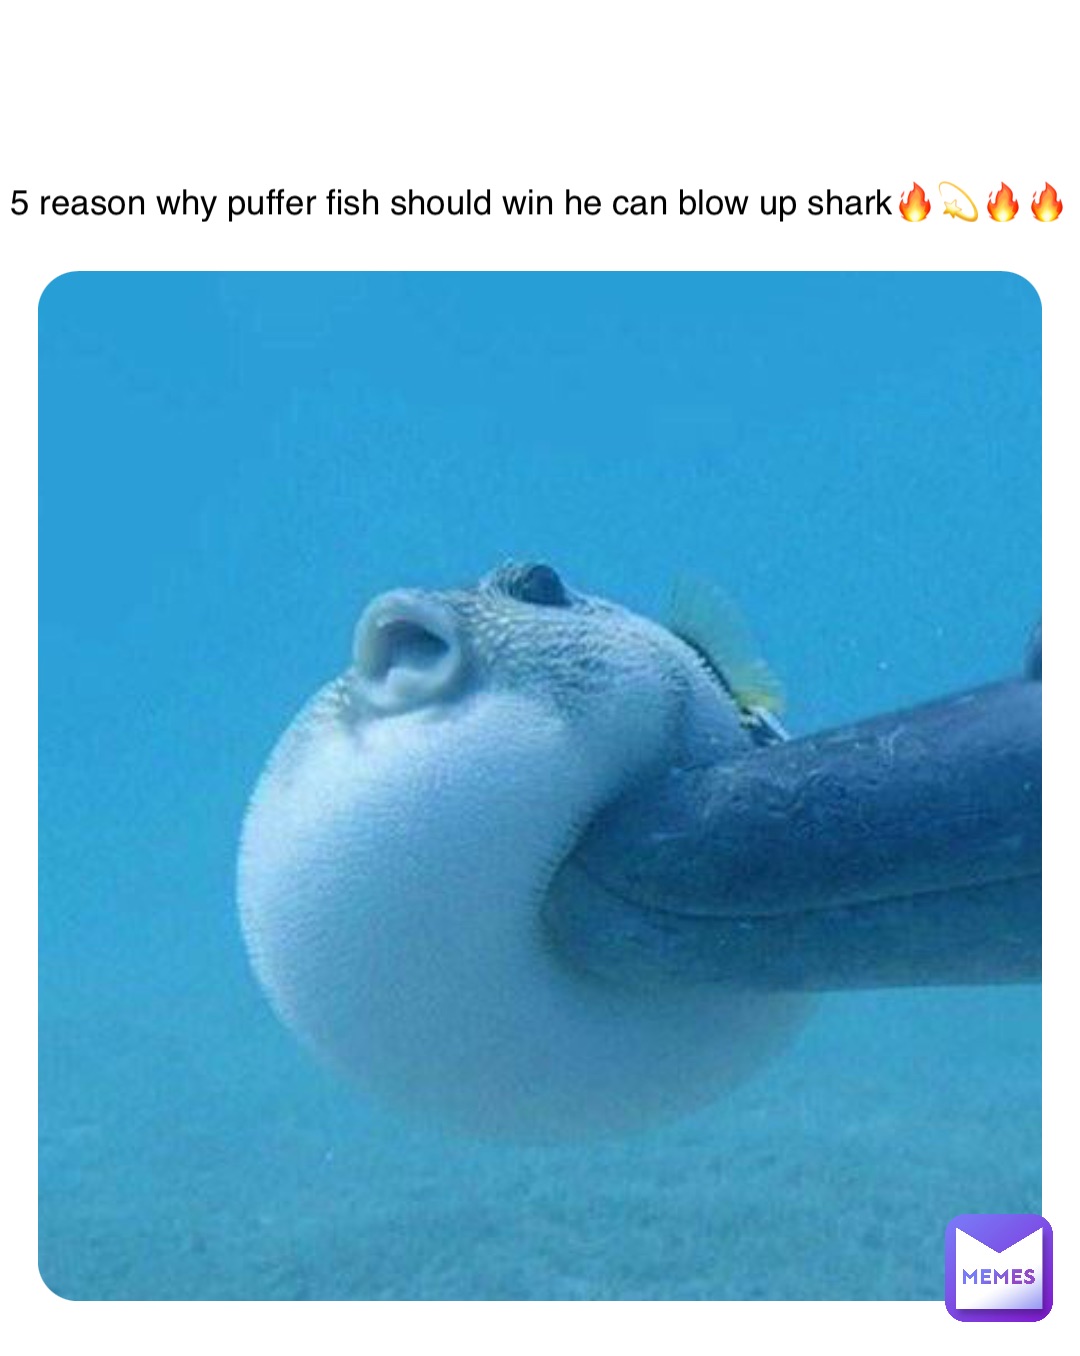 Double tap to edit 5 reason why puffer fish should win he can blow up shark🔥💫🔥🔥